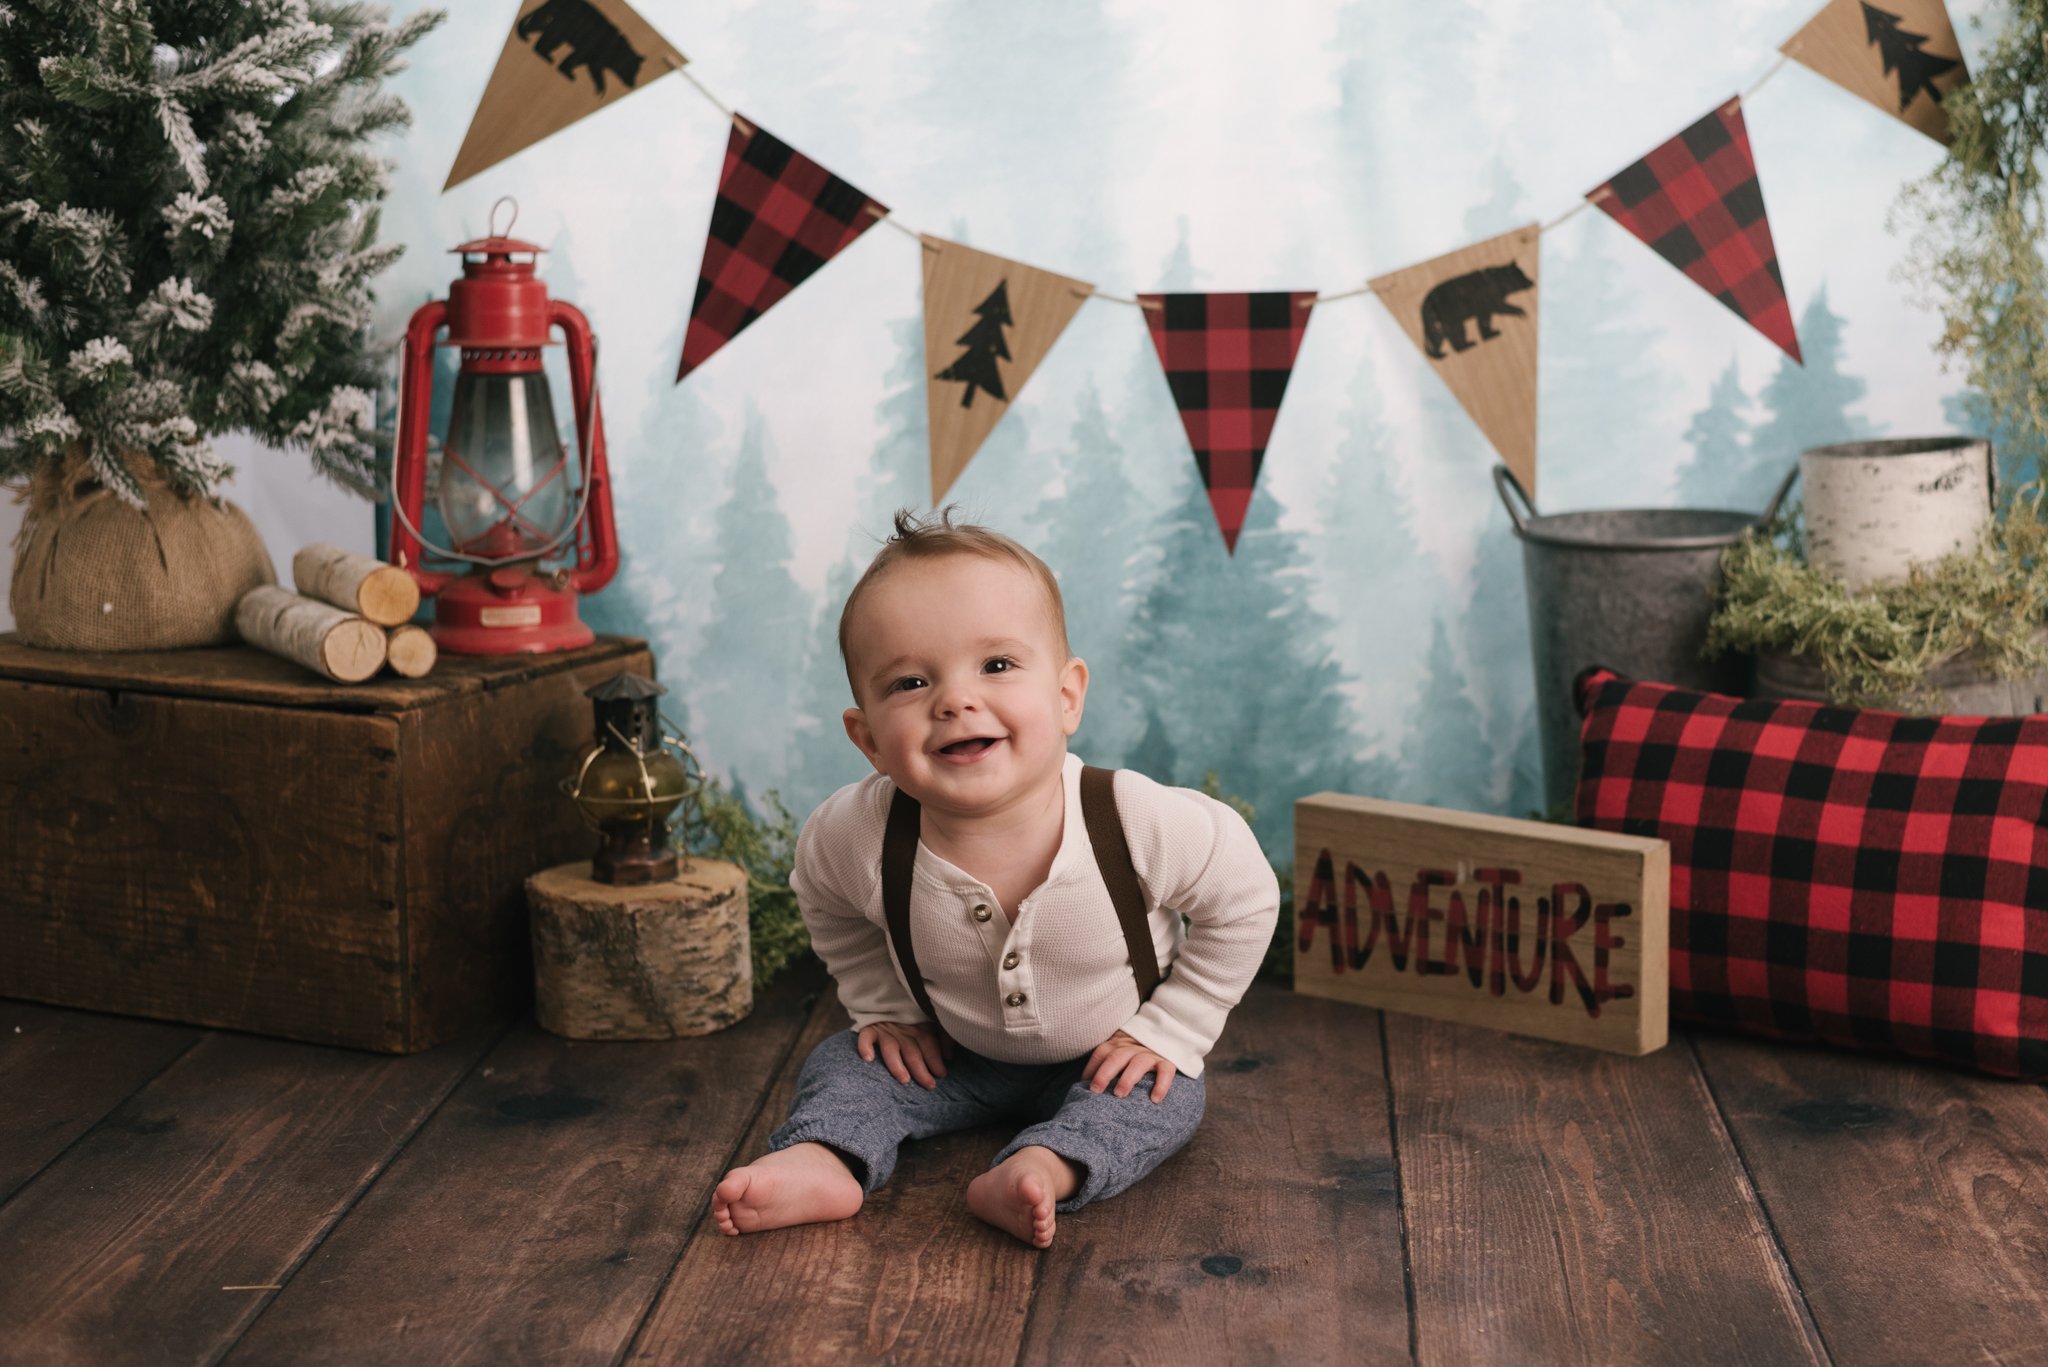 Lumber_Jack_Frist_Birthday_Boy_Smash_and_Splash_Session_Cake_Studio_by_Erika_Child_and_Family_Photographer_for_Christie_Leigh_Photo_in_Southington_OH_Ohio_Trumbull_County_003.jpg